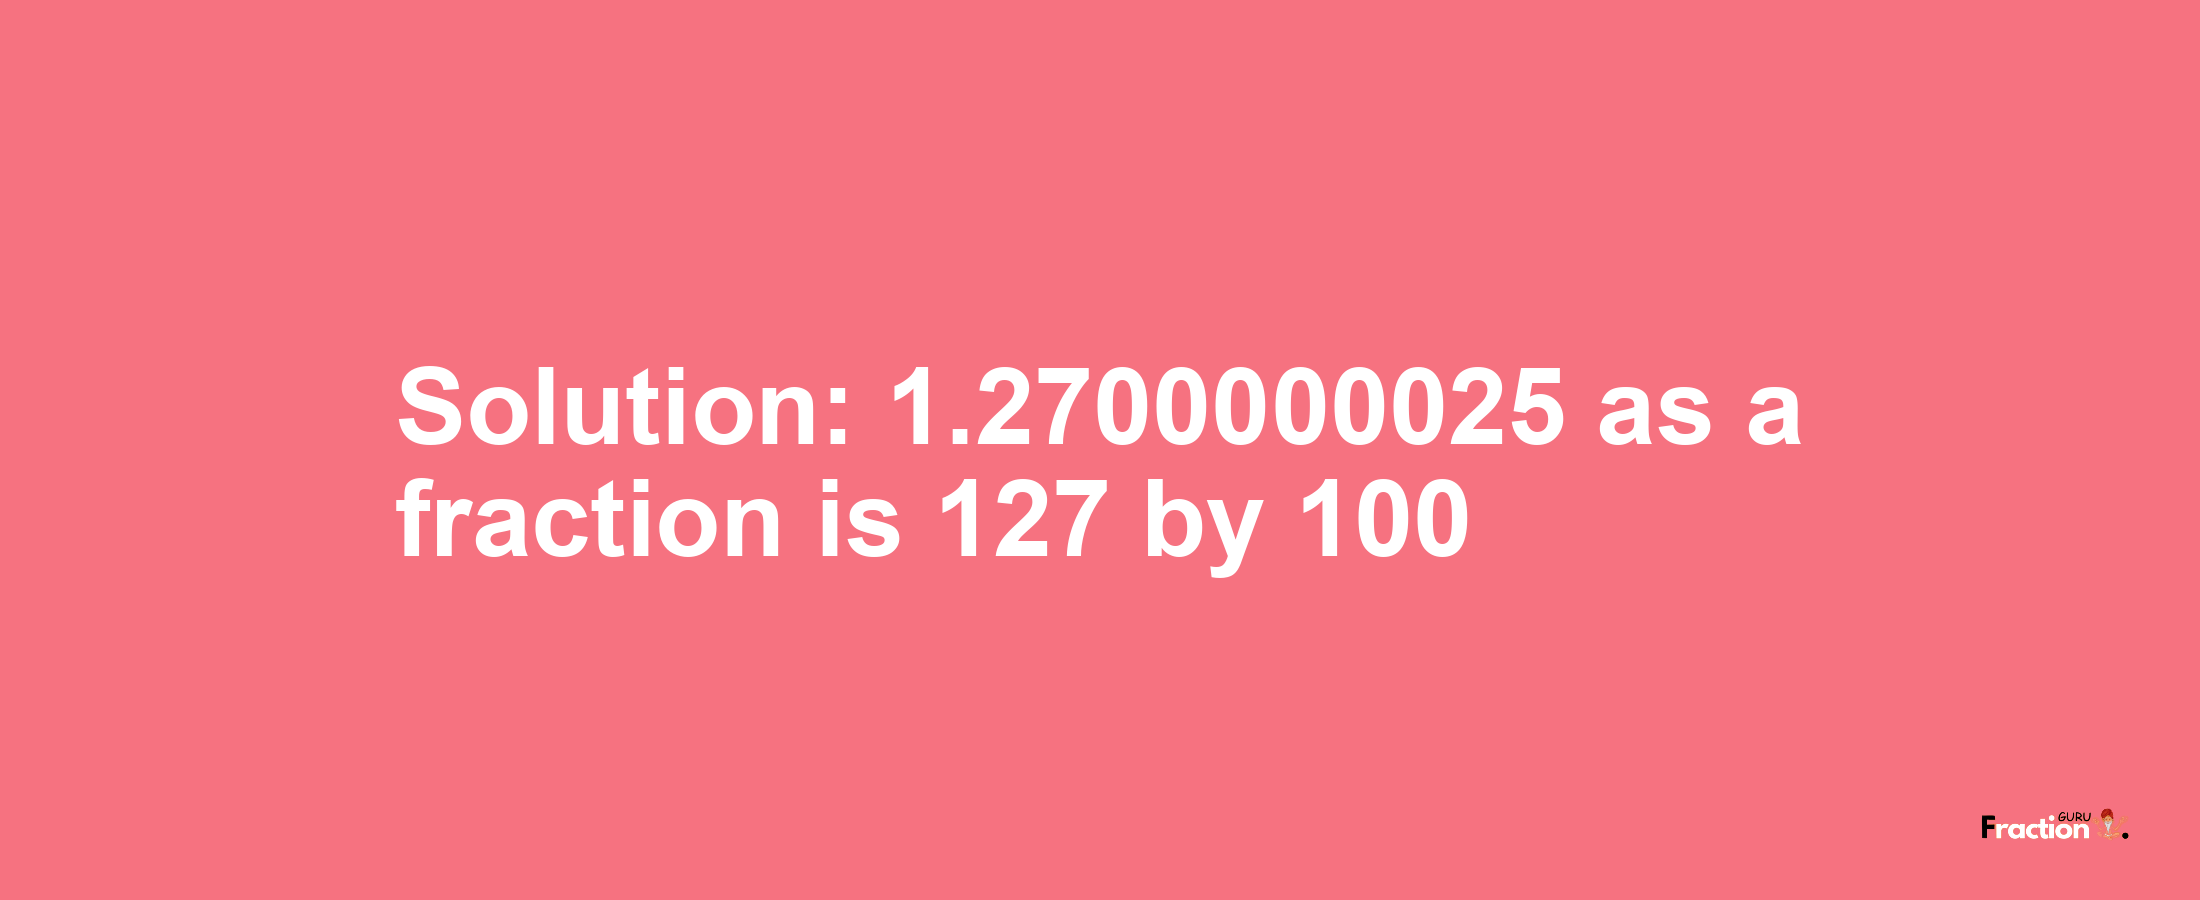 Solution:1.2700000025 as a fraction is 127/100